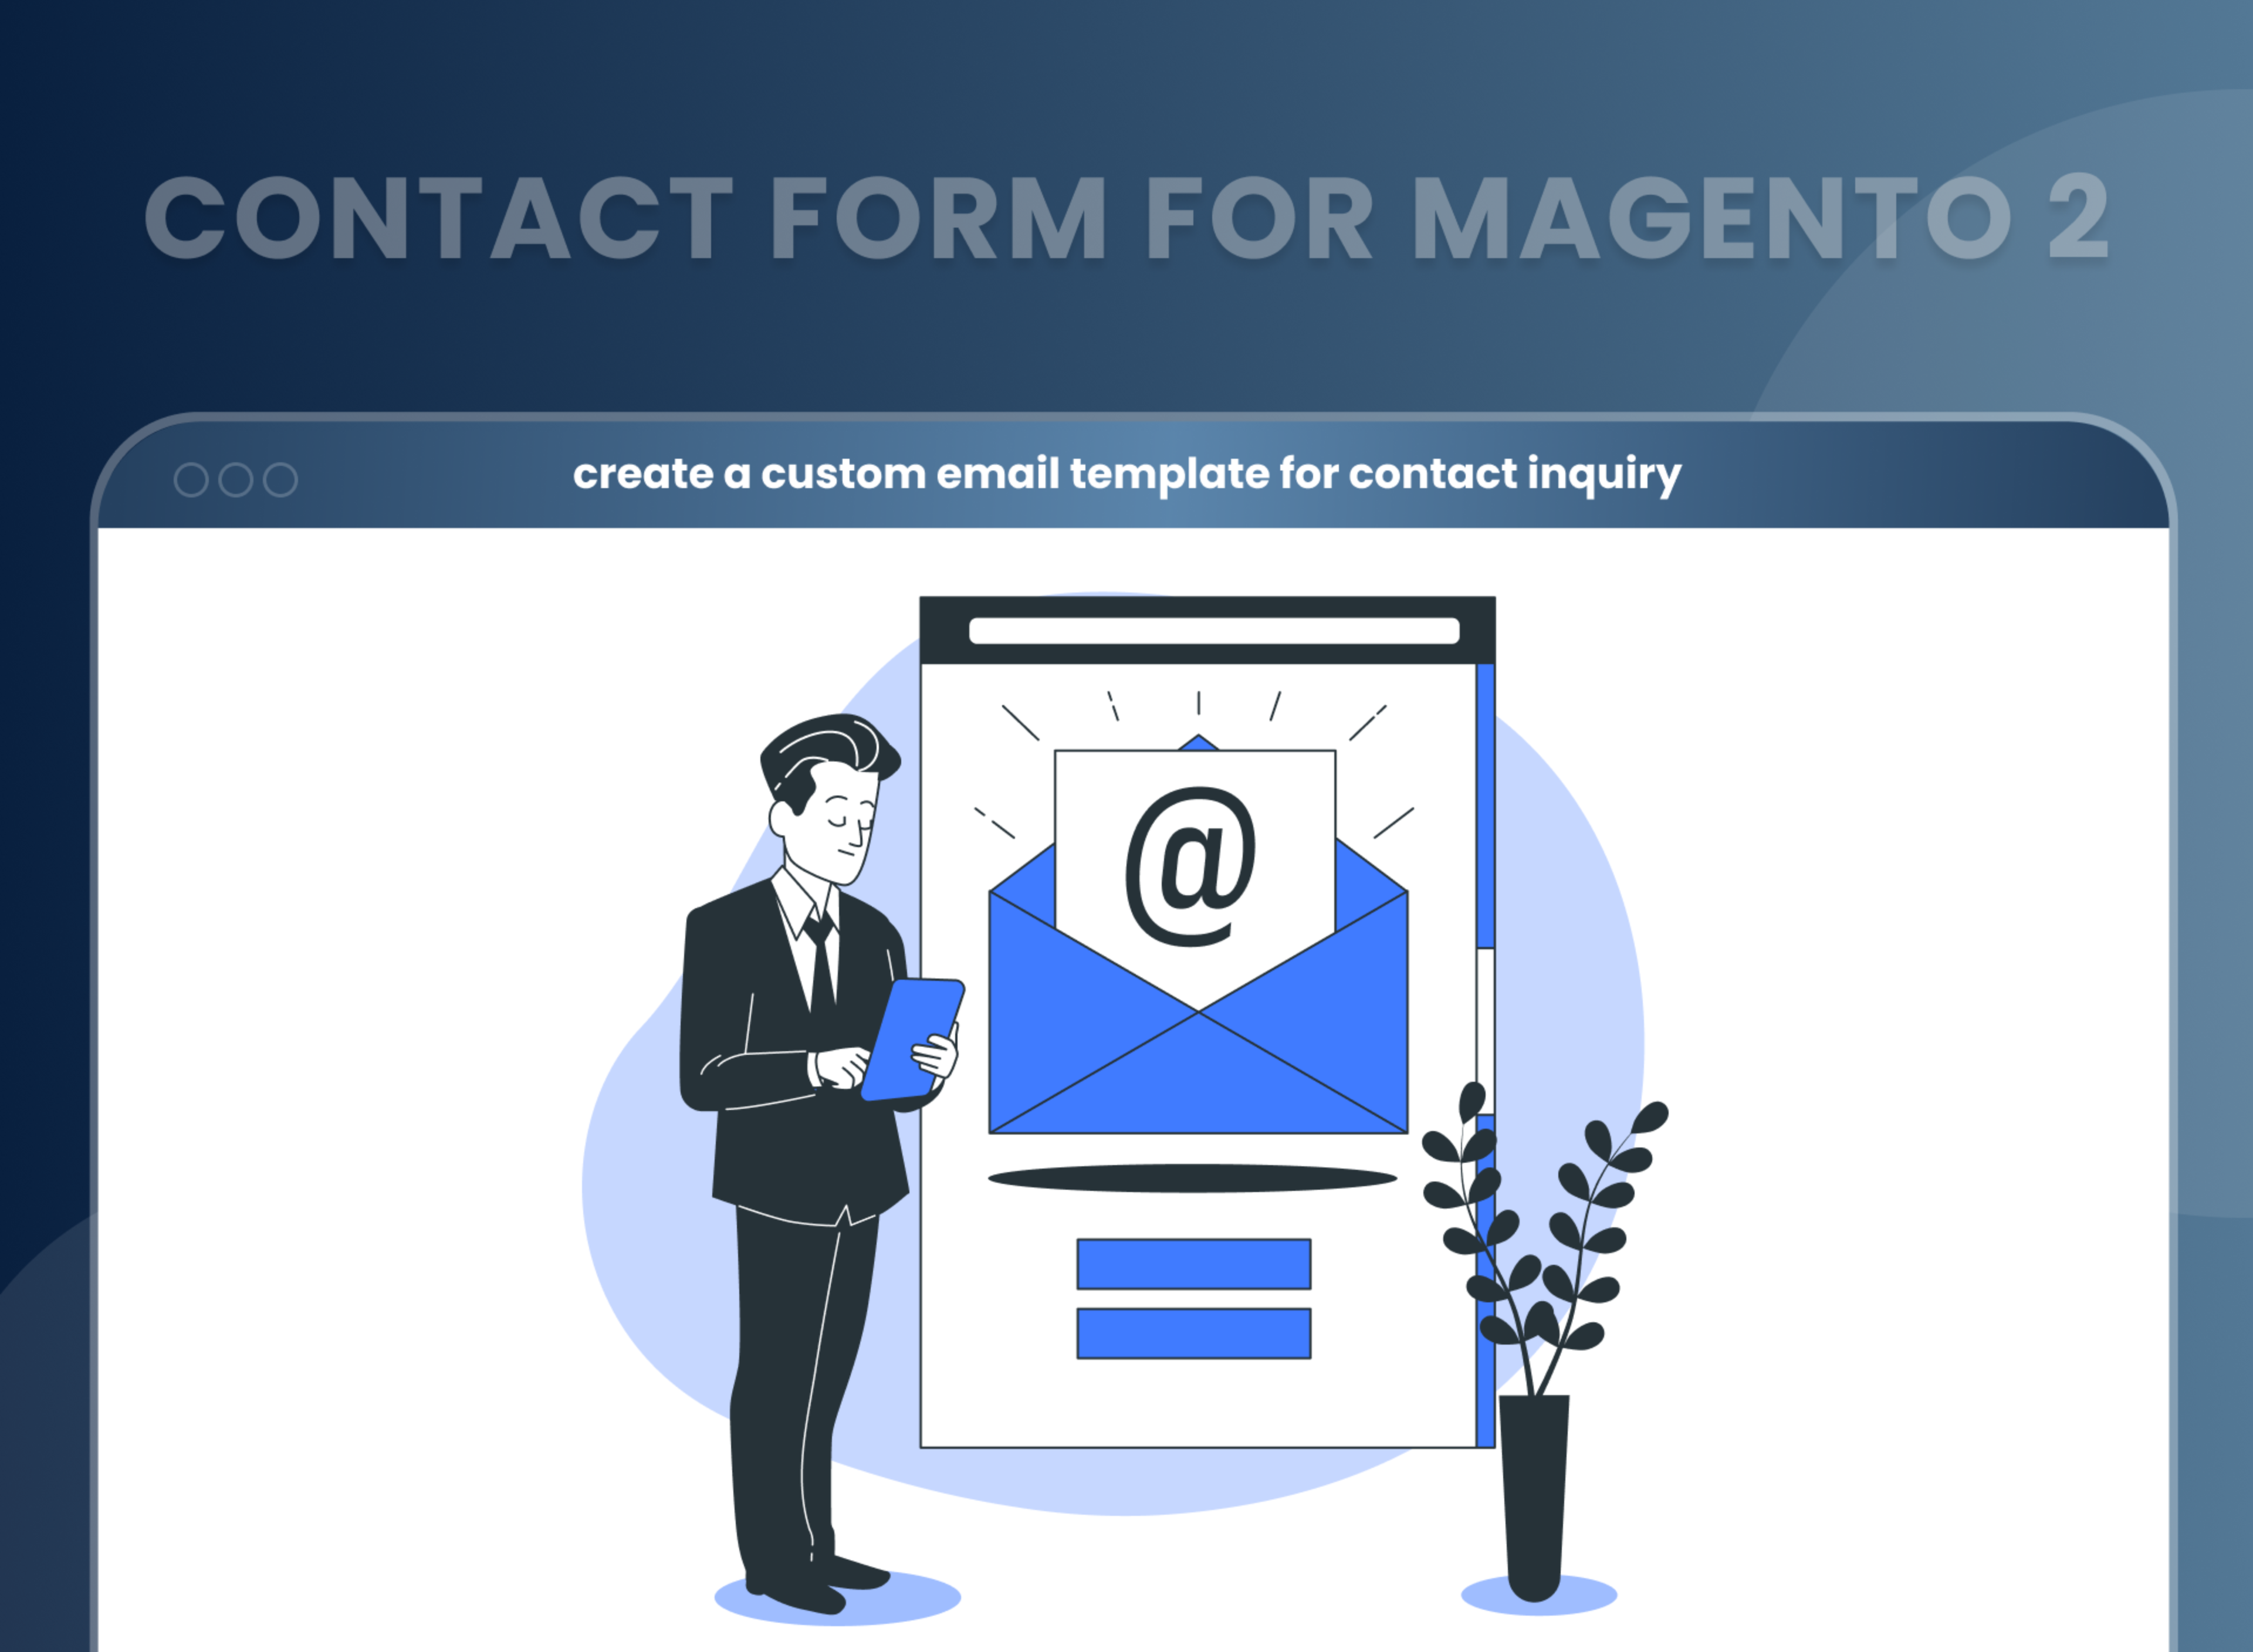 create a custom email template for contact inquiry